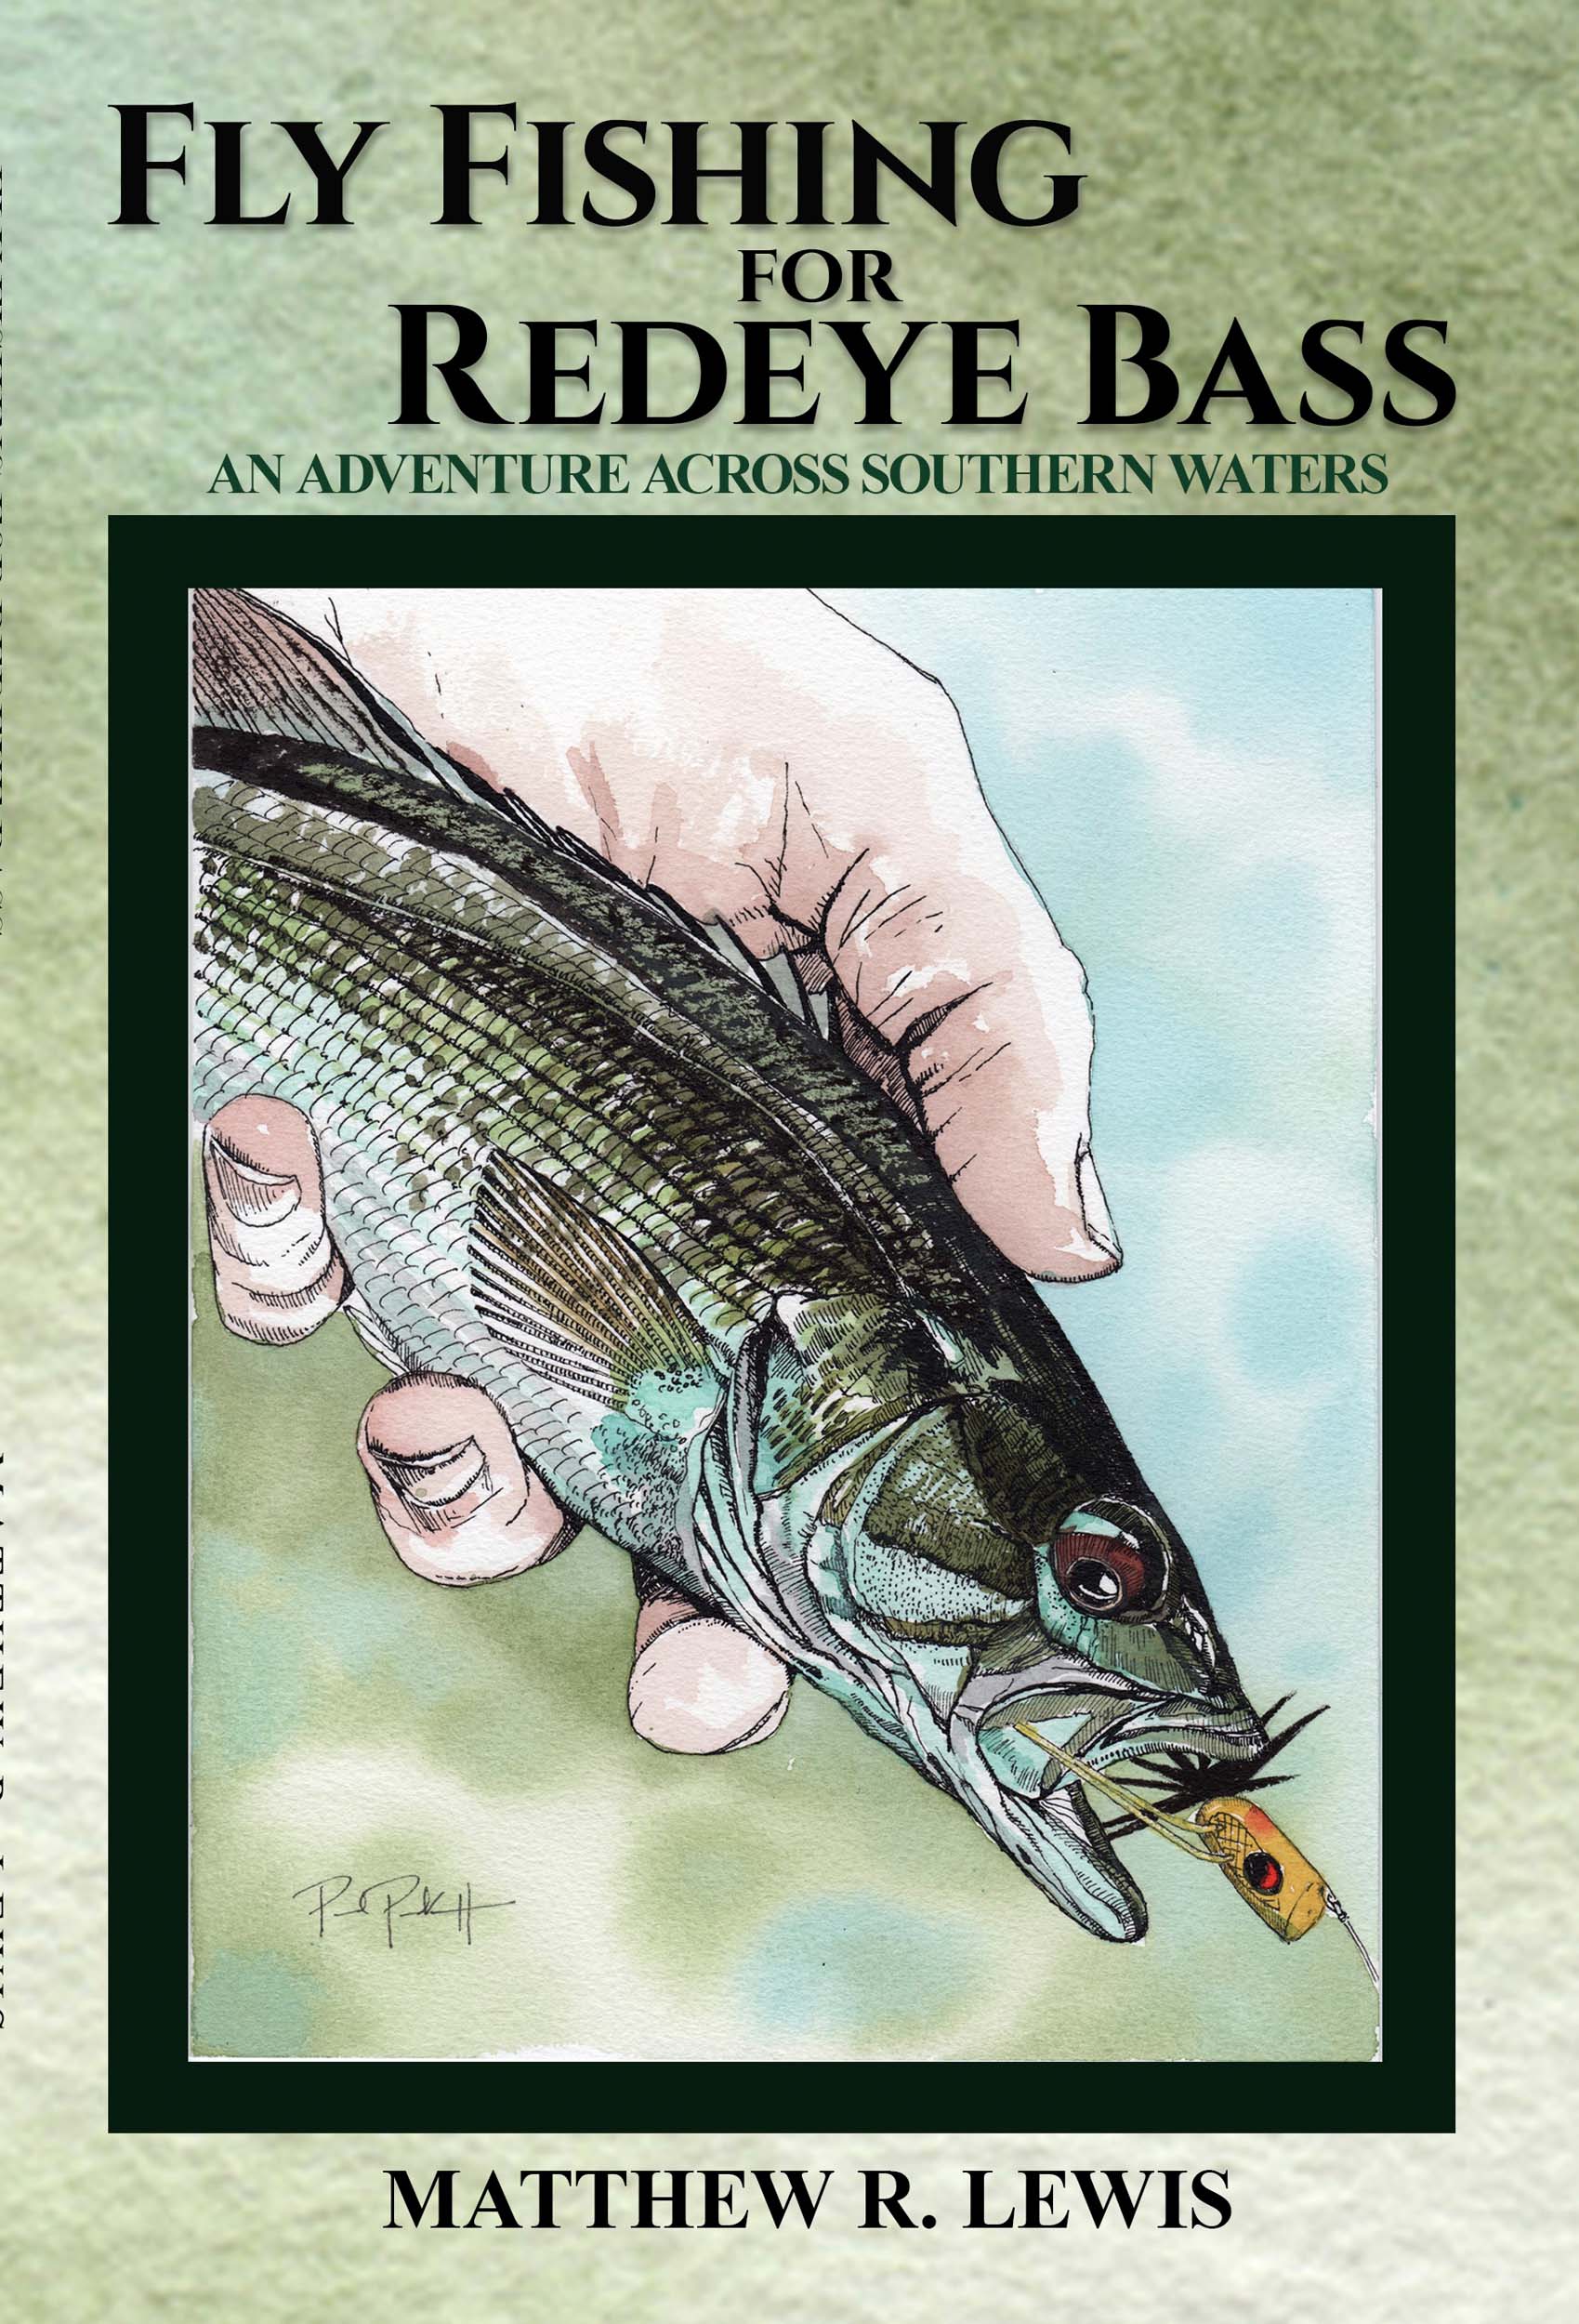 book cover of fly fishing for redeye bass